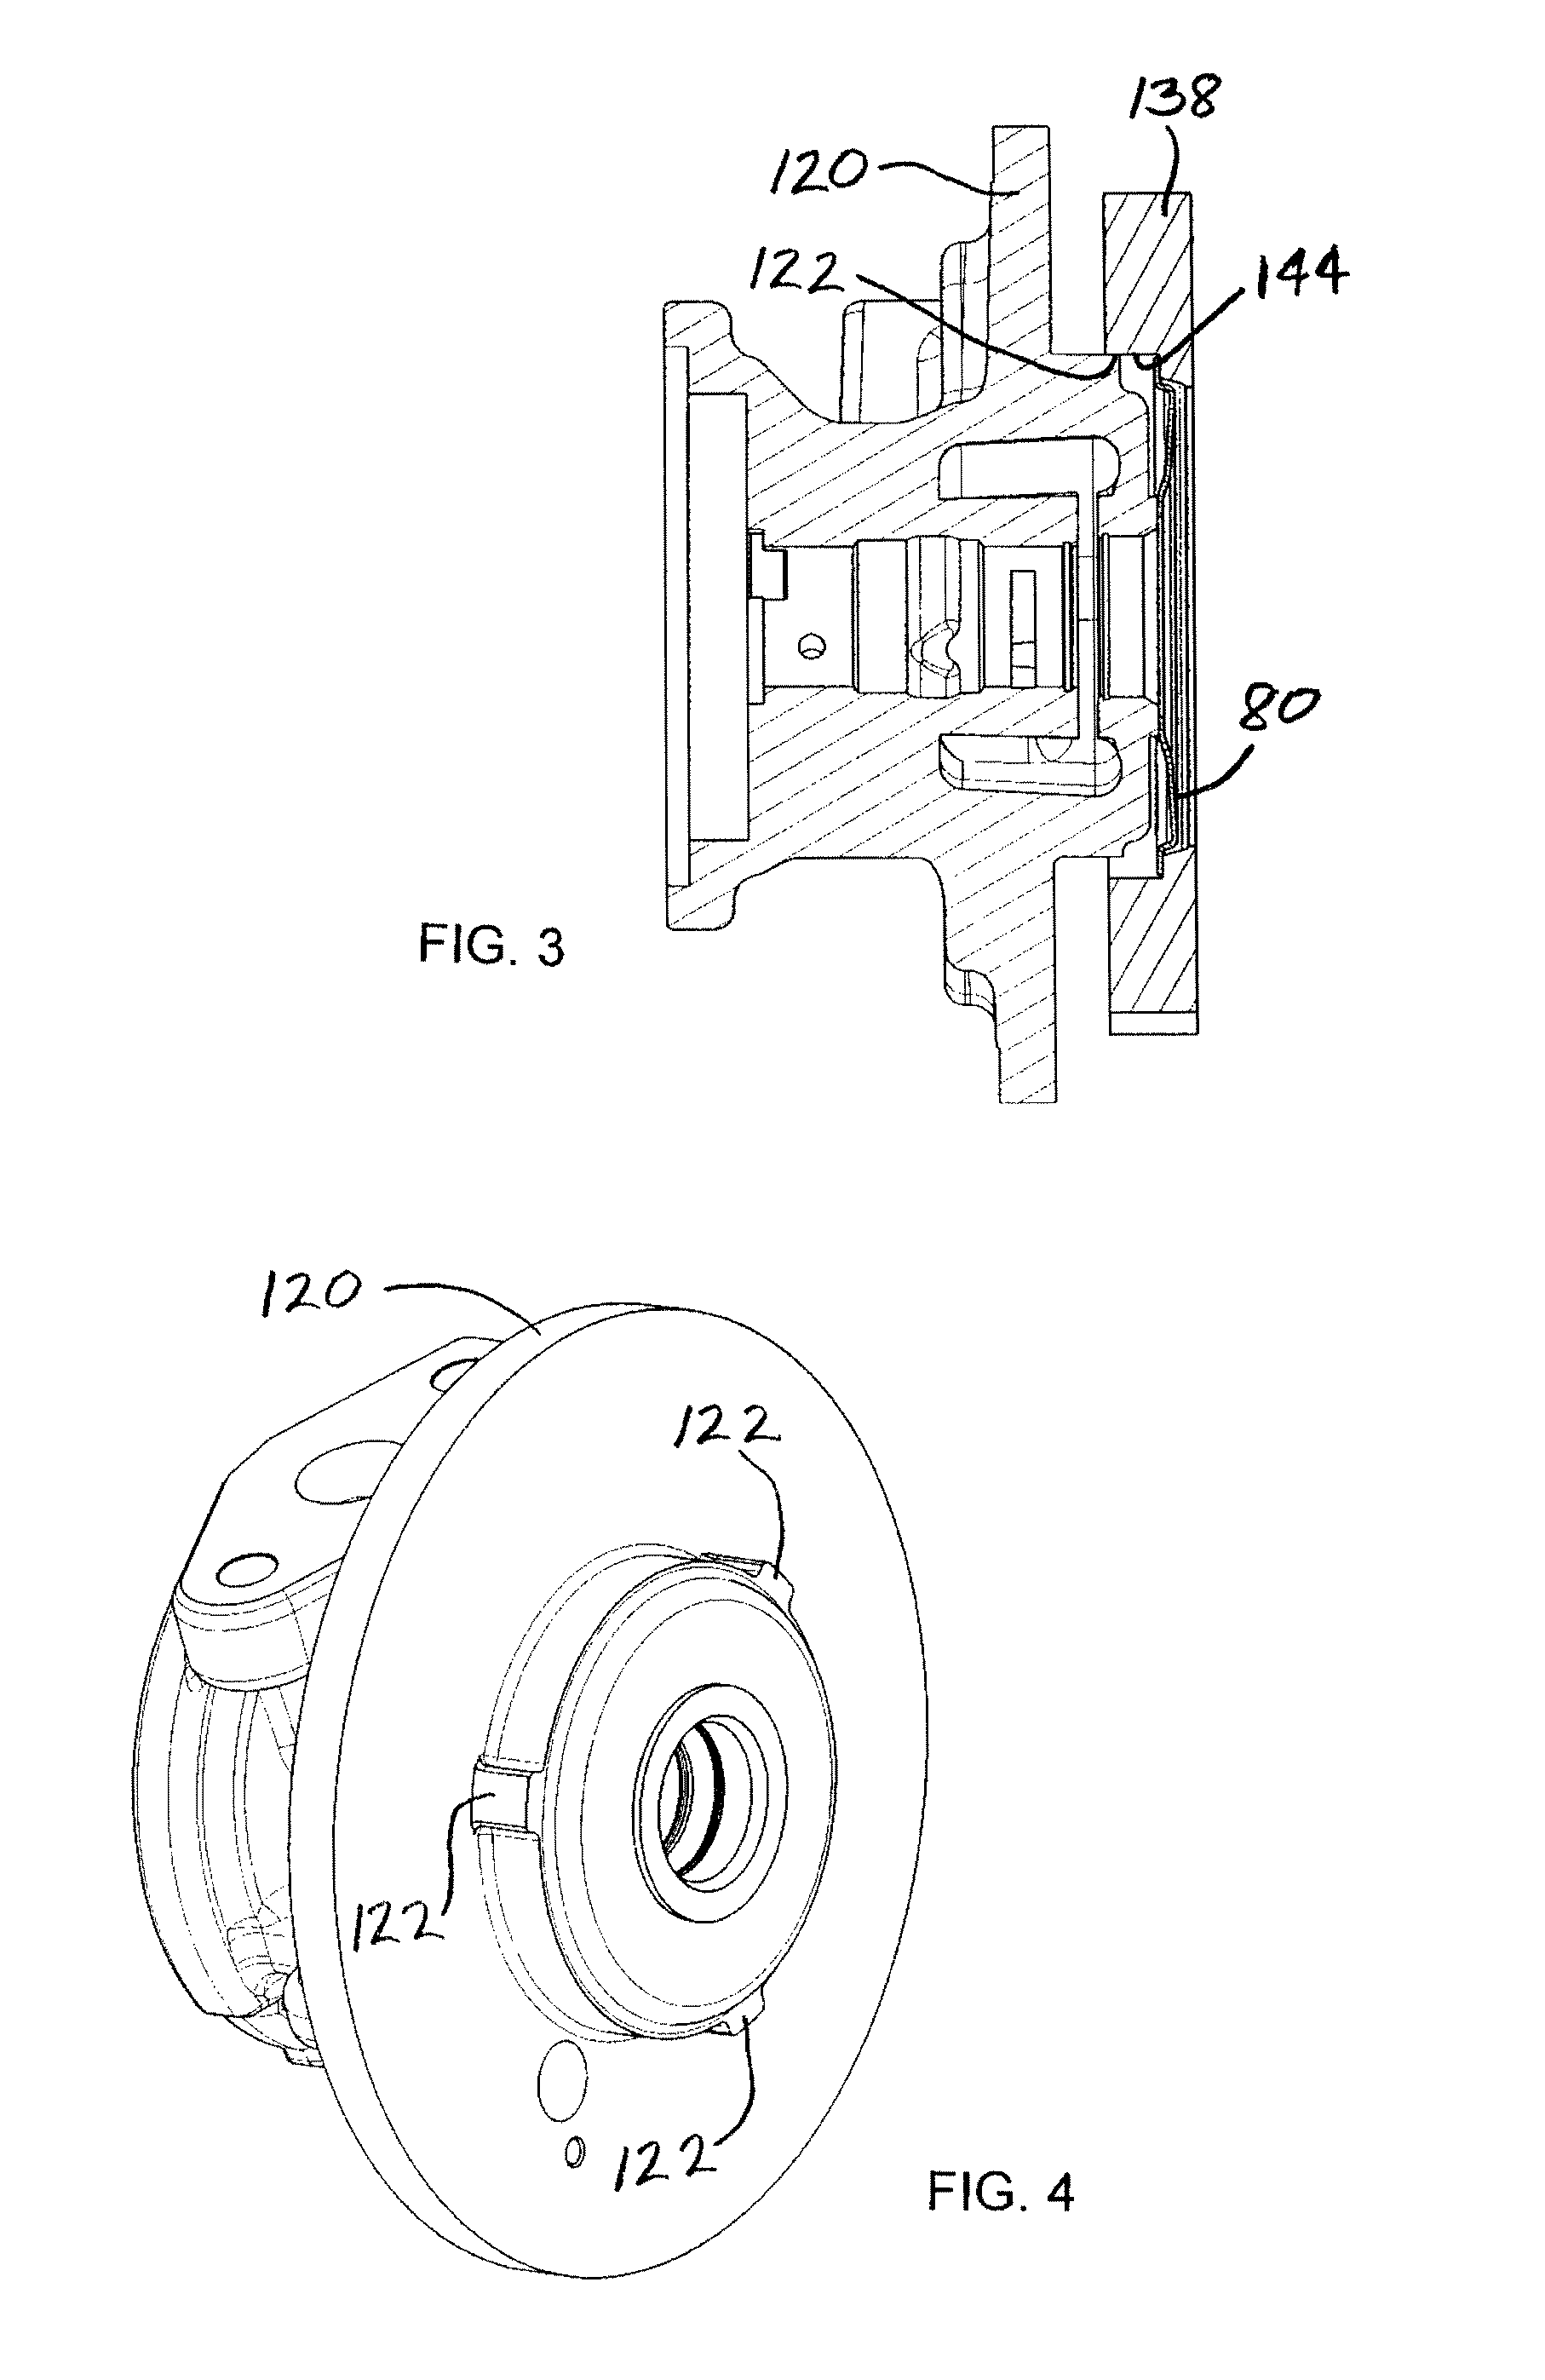 Variable-nozzle cartridge for a turbocharger